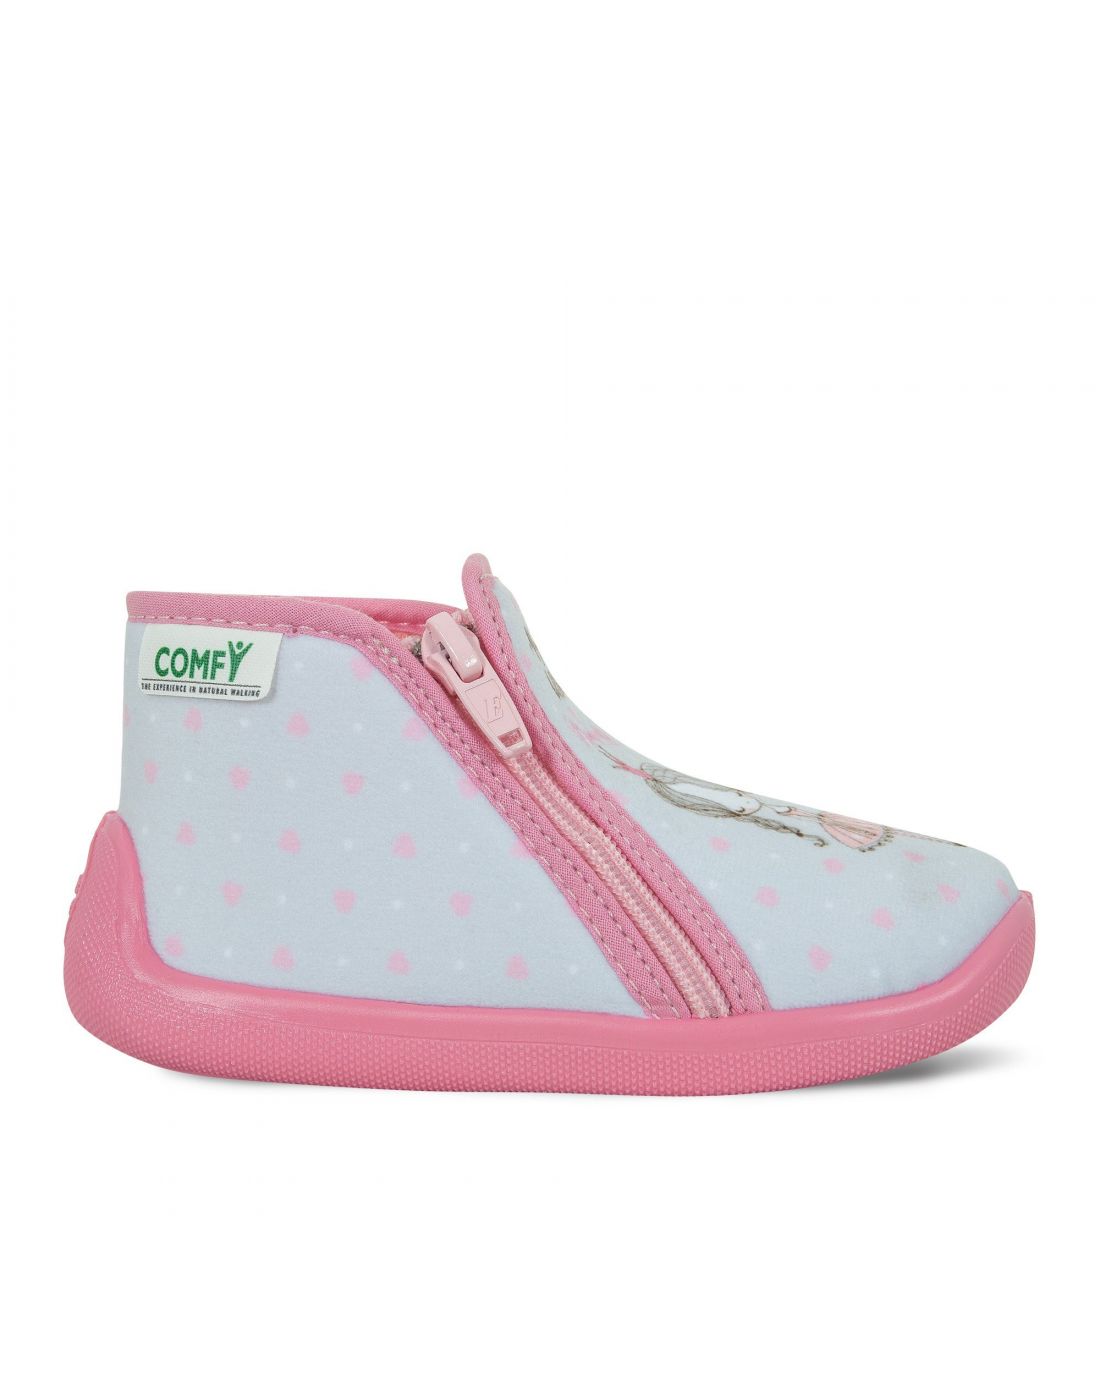 Comfy Kids Slippers